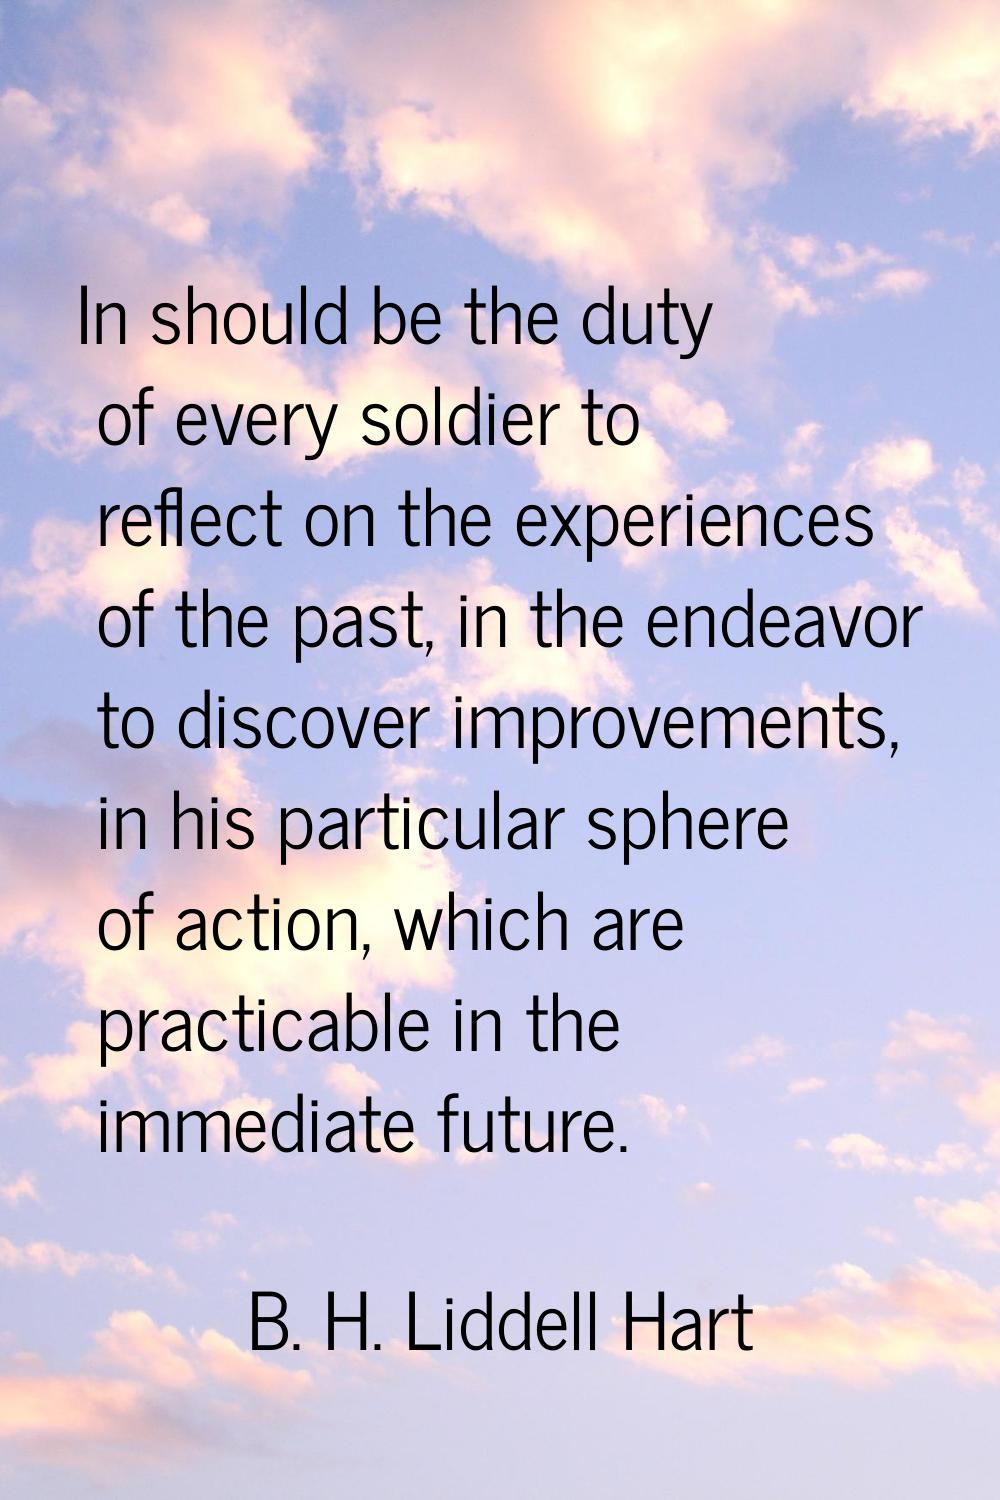 In should be the duty of every soldier to reflect on the experiences of the past, in the endeavor t